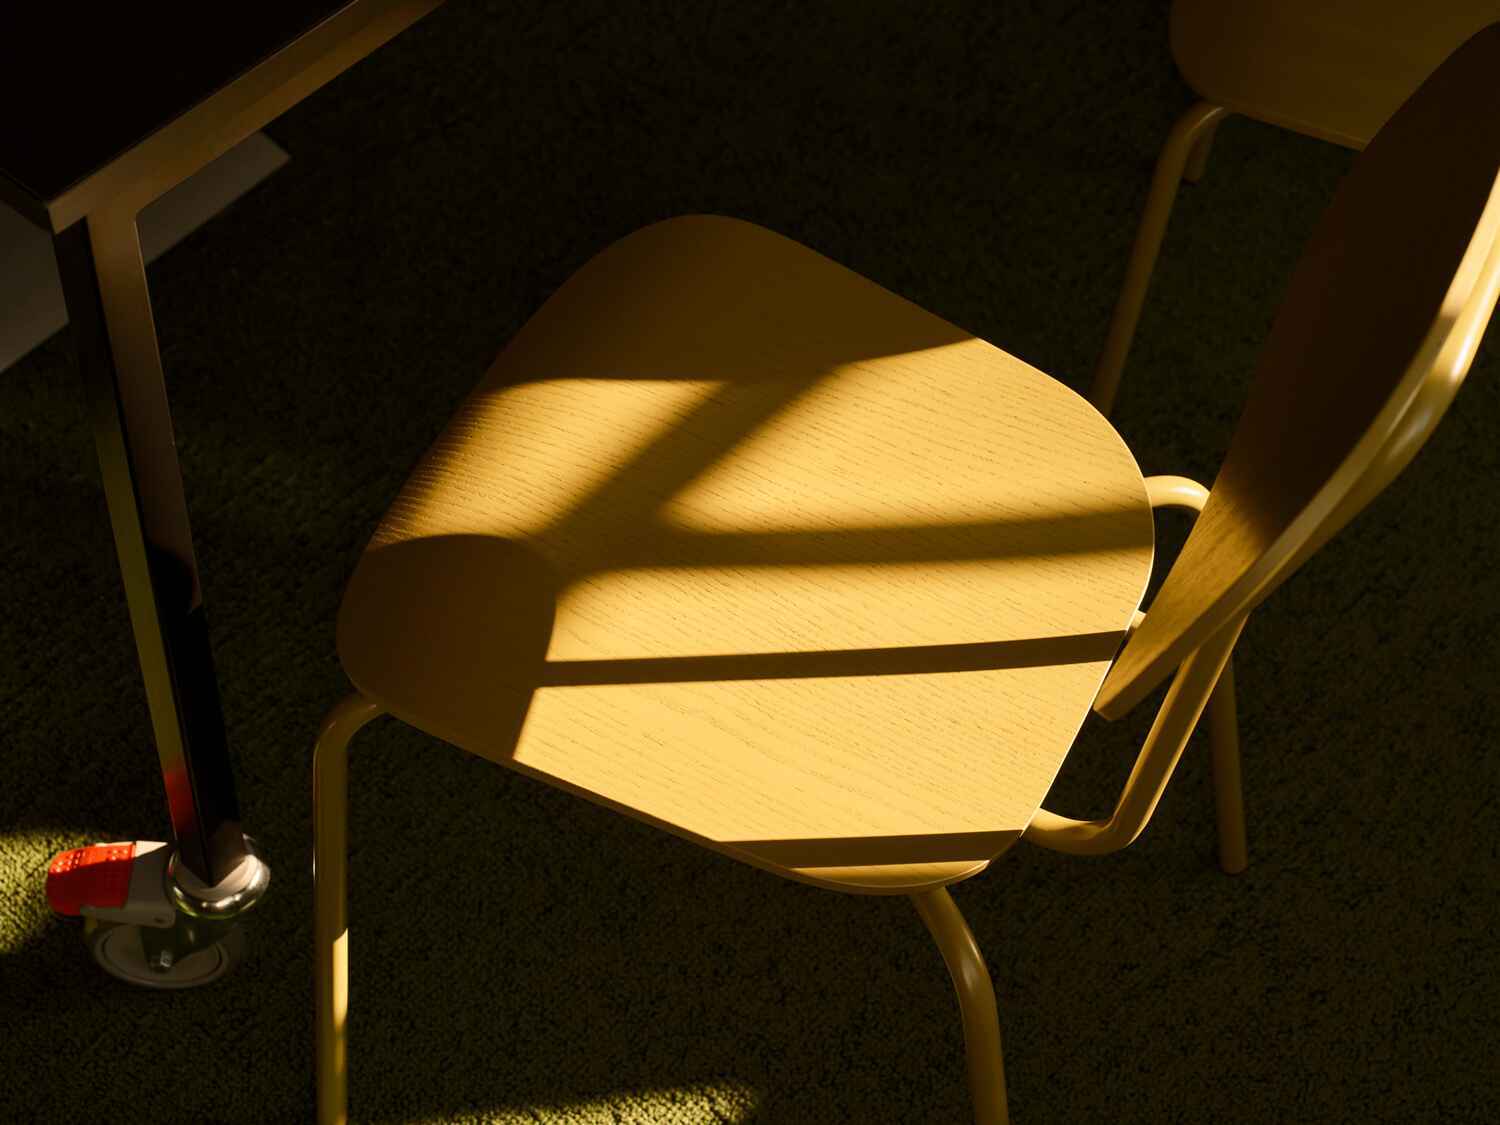 Chair with shades on it